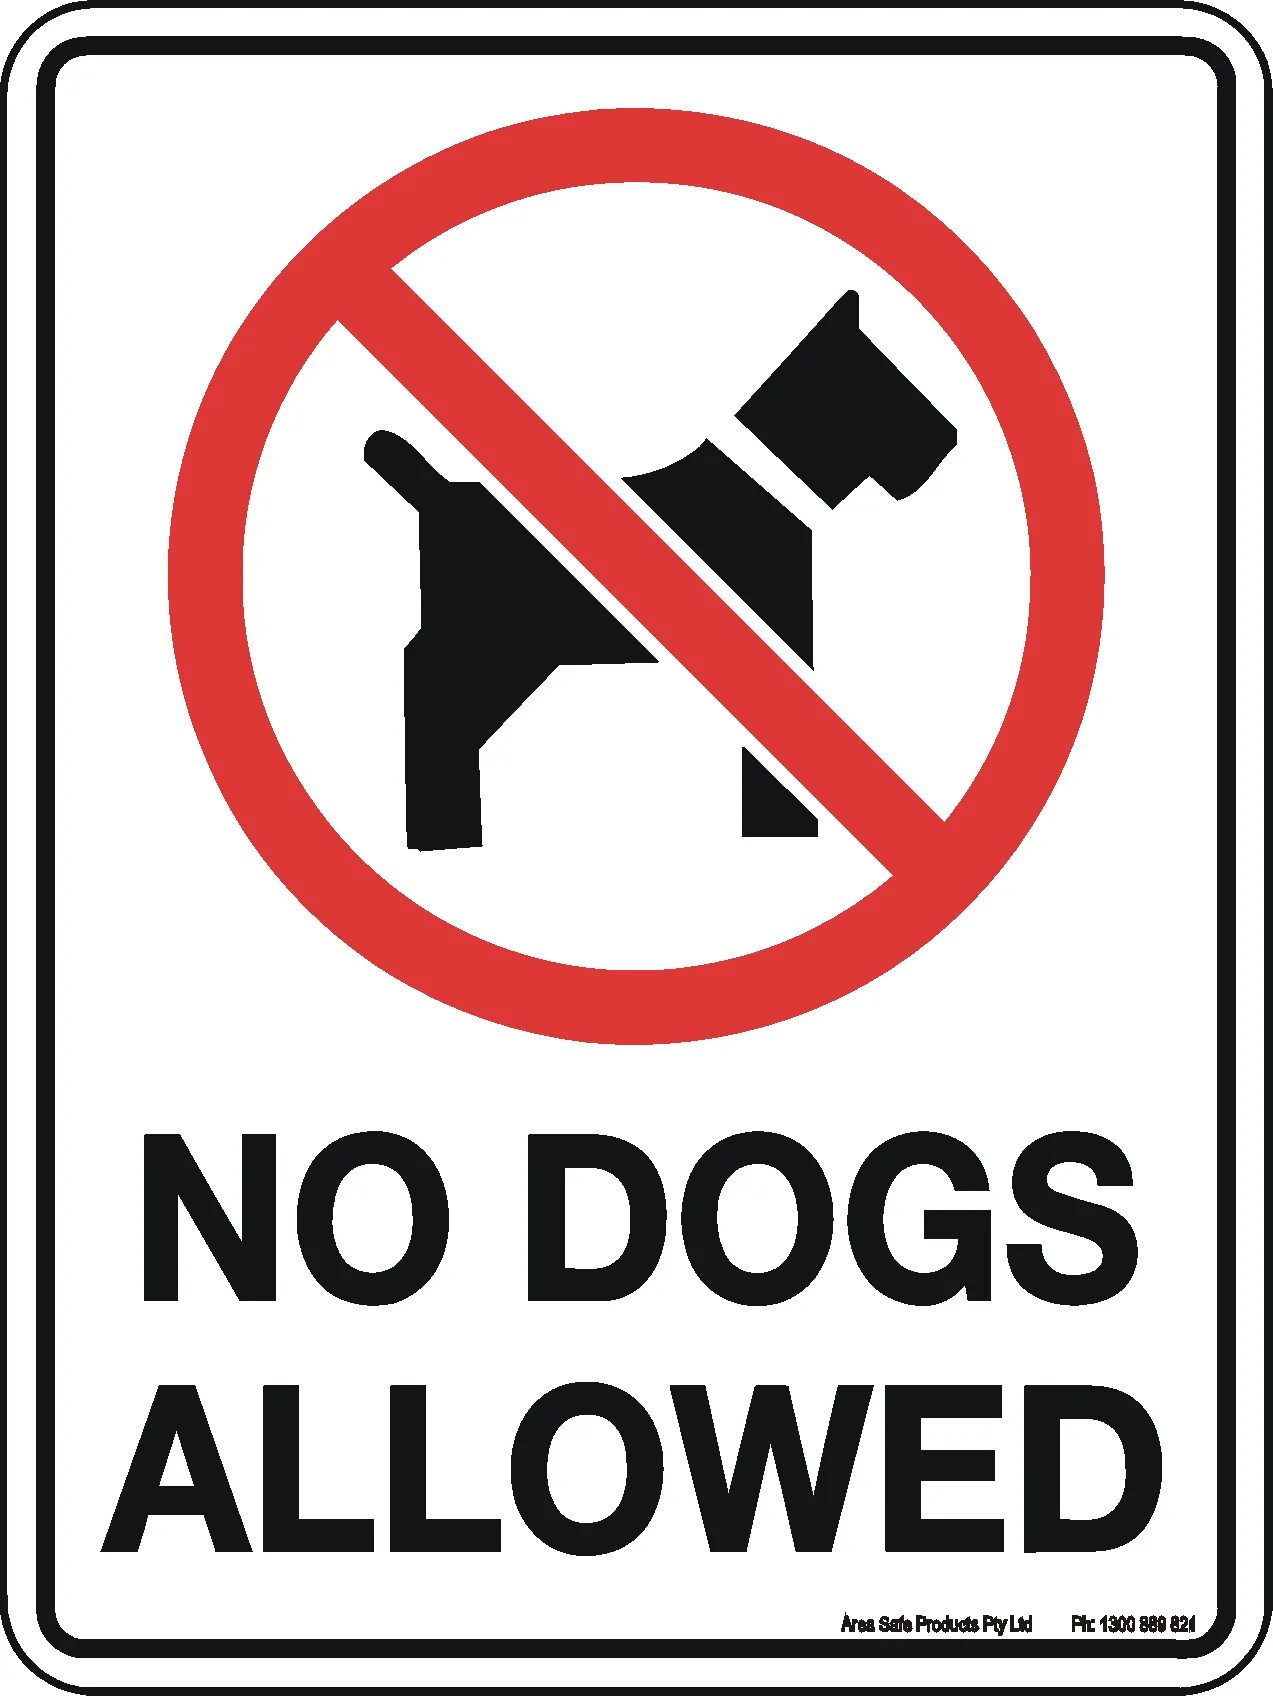 No Dogs allowed. No Dogs allowed sign. Знак Russians and Dogs are not allowed. Not allowed Dog. Not allowed tv текст